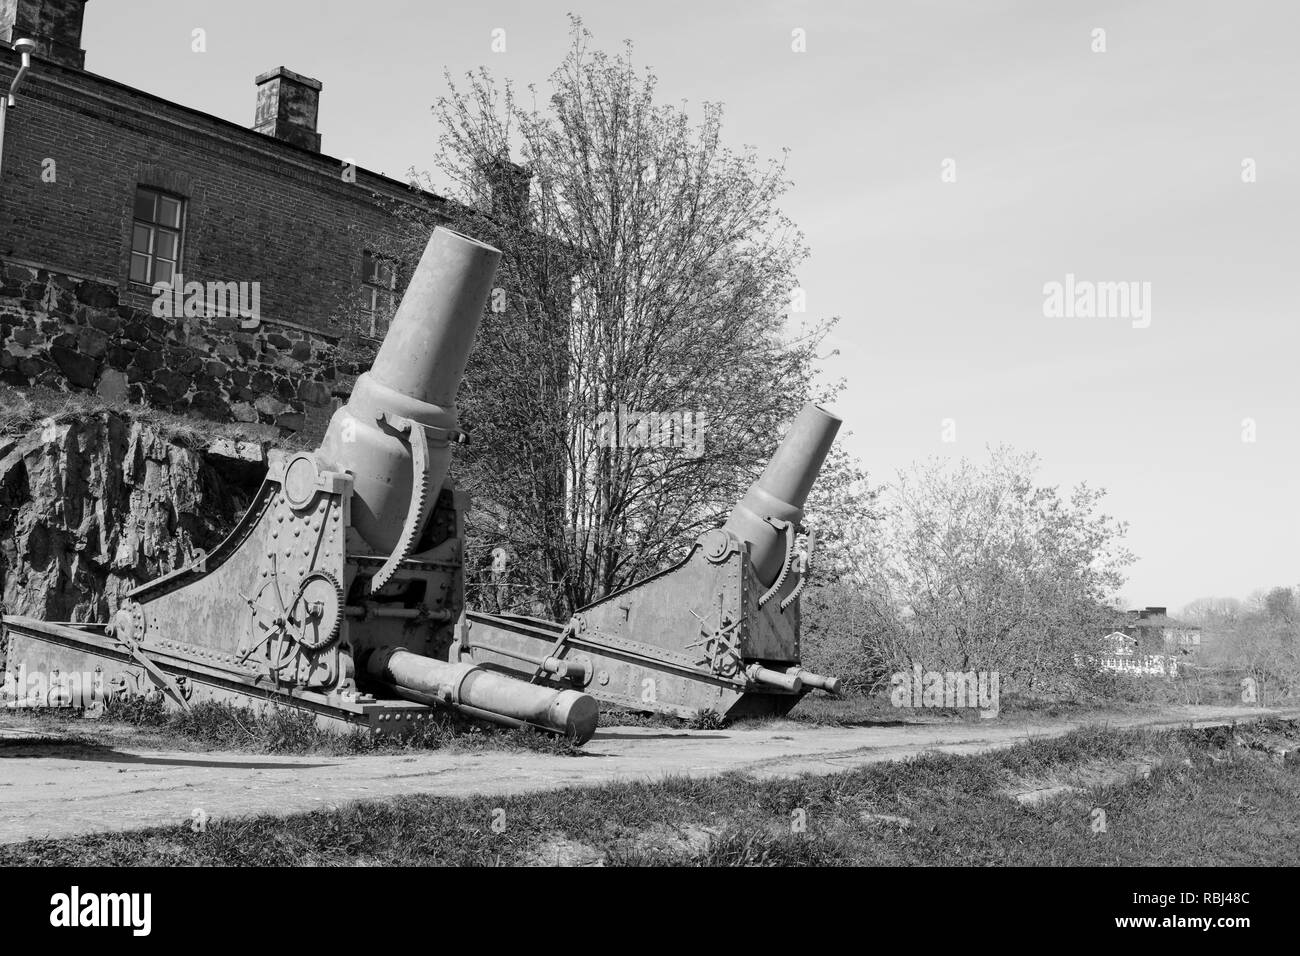 Two rusted cannons in front of a military building on Suomenlinna island, Finland. A total of 100 stand on the sea fortress - monochrome processing Stock Photo